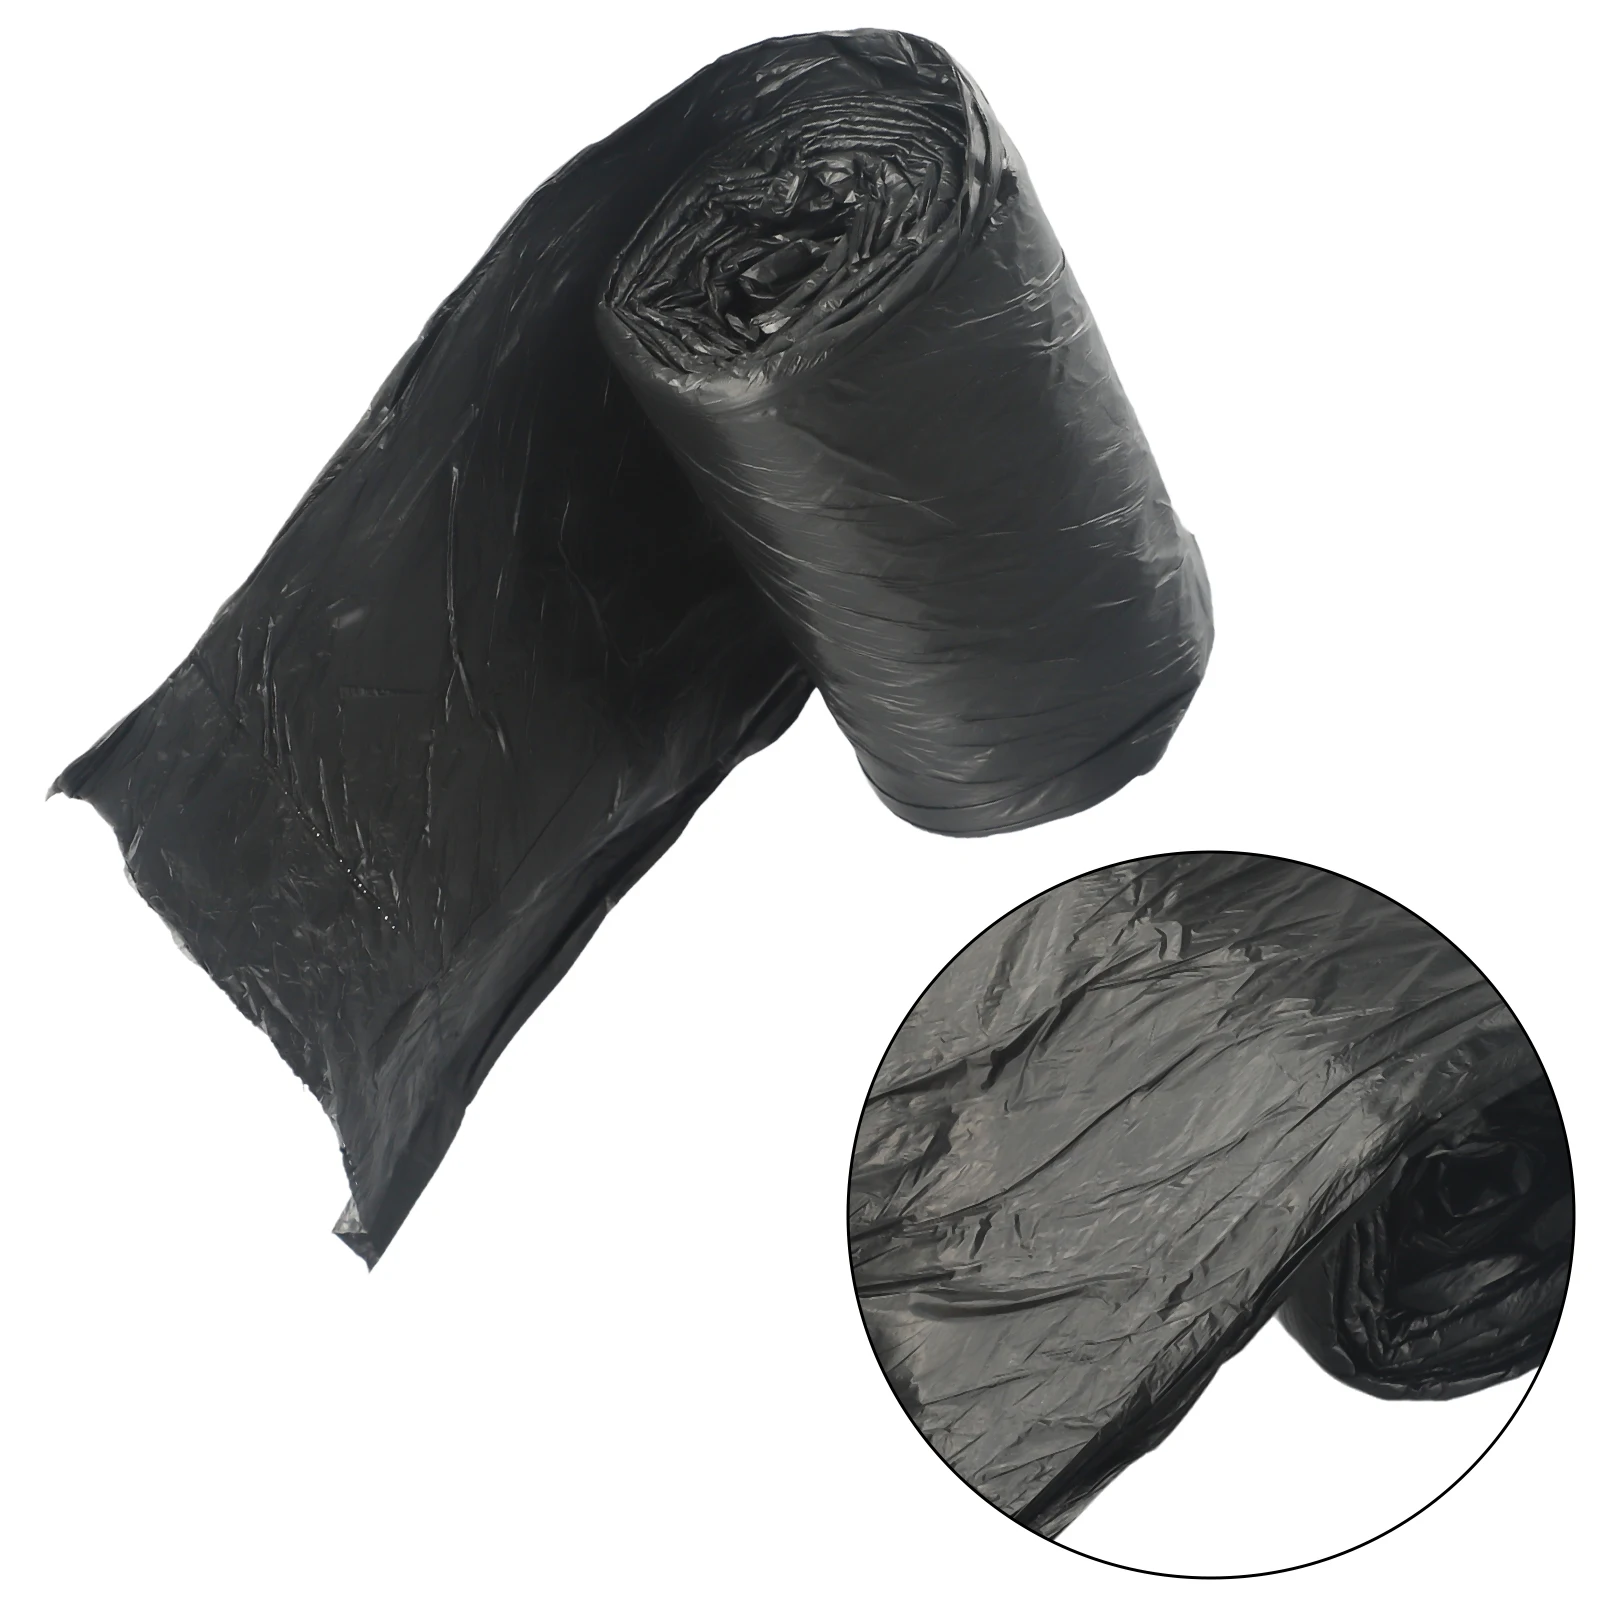 50x60cm Garbage Bags Black Thicken Disposable Environmental Waste Bag Privacy Plastic Trash Bags Recycling Recycle Bin Office